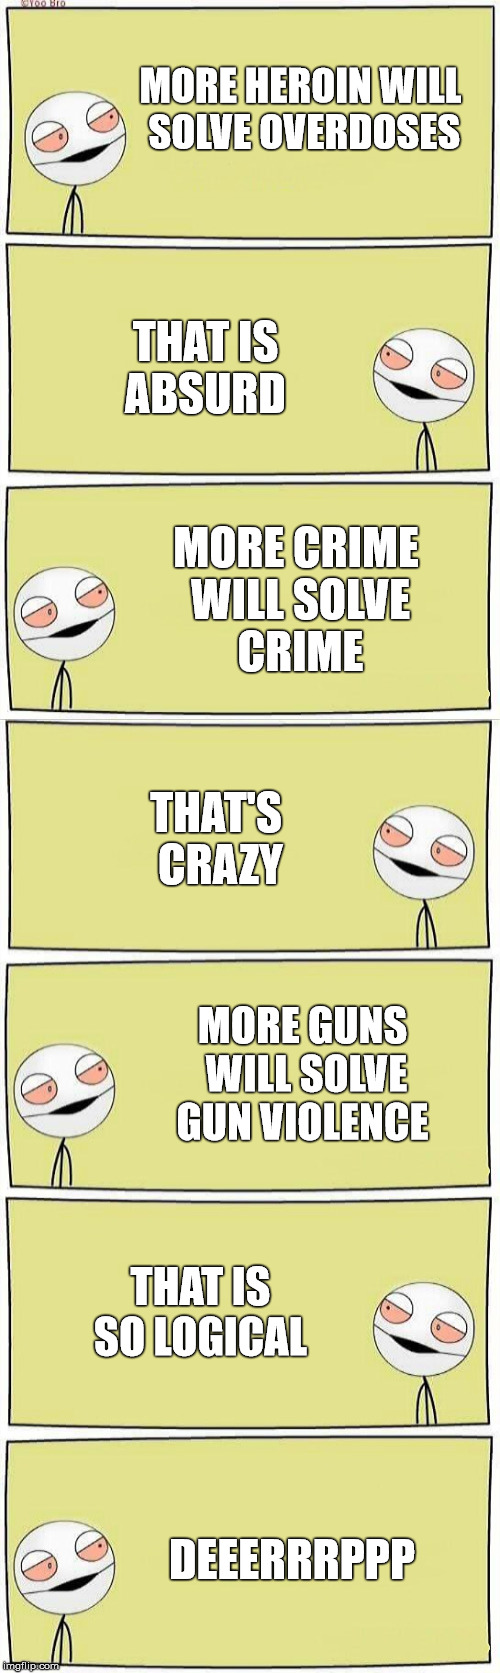 MAGA Logic Deeerrppieee | MORE HEROIN WILL SOLVE OVERDOSES; THAT IS ABSURD; MORE CRIME WILL SOLVE CRIME; THAT'S CRAZY; MORE GUNS WILL SOLVE GUN VIOLENCE; THAT IS SO LOGICAL; DEEERRRPPP | image tagged in memes,republicans,nra,gun loving conservative,stupid | made w/ Imgflip meme maker